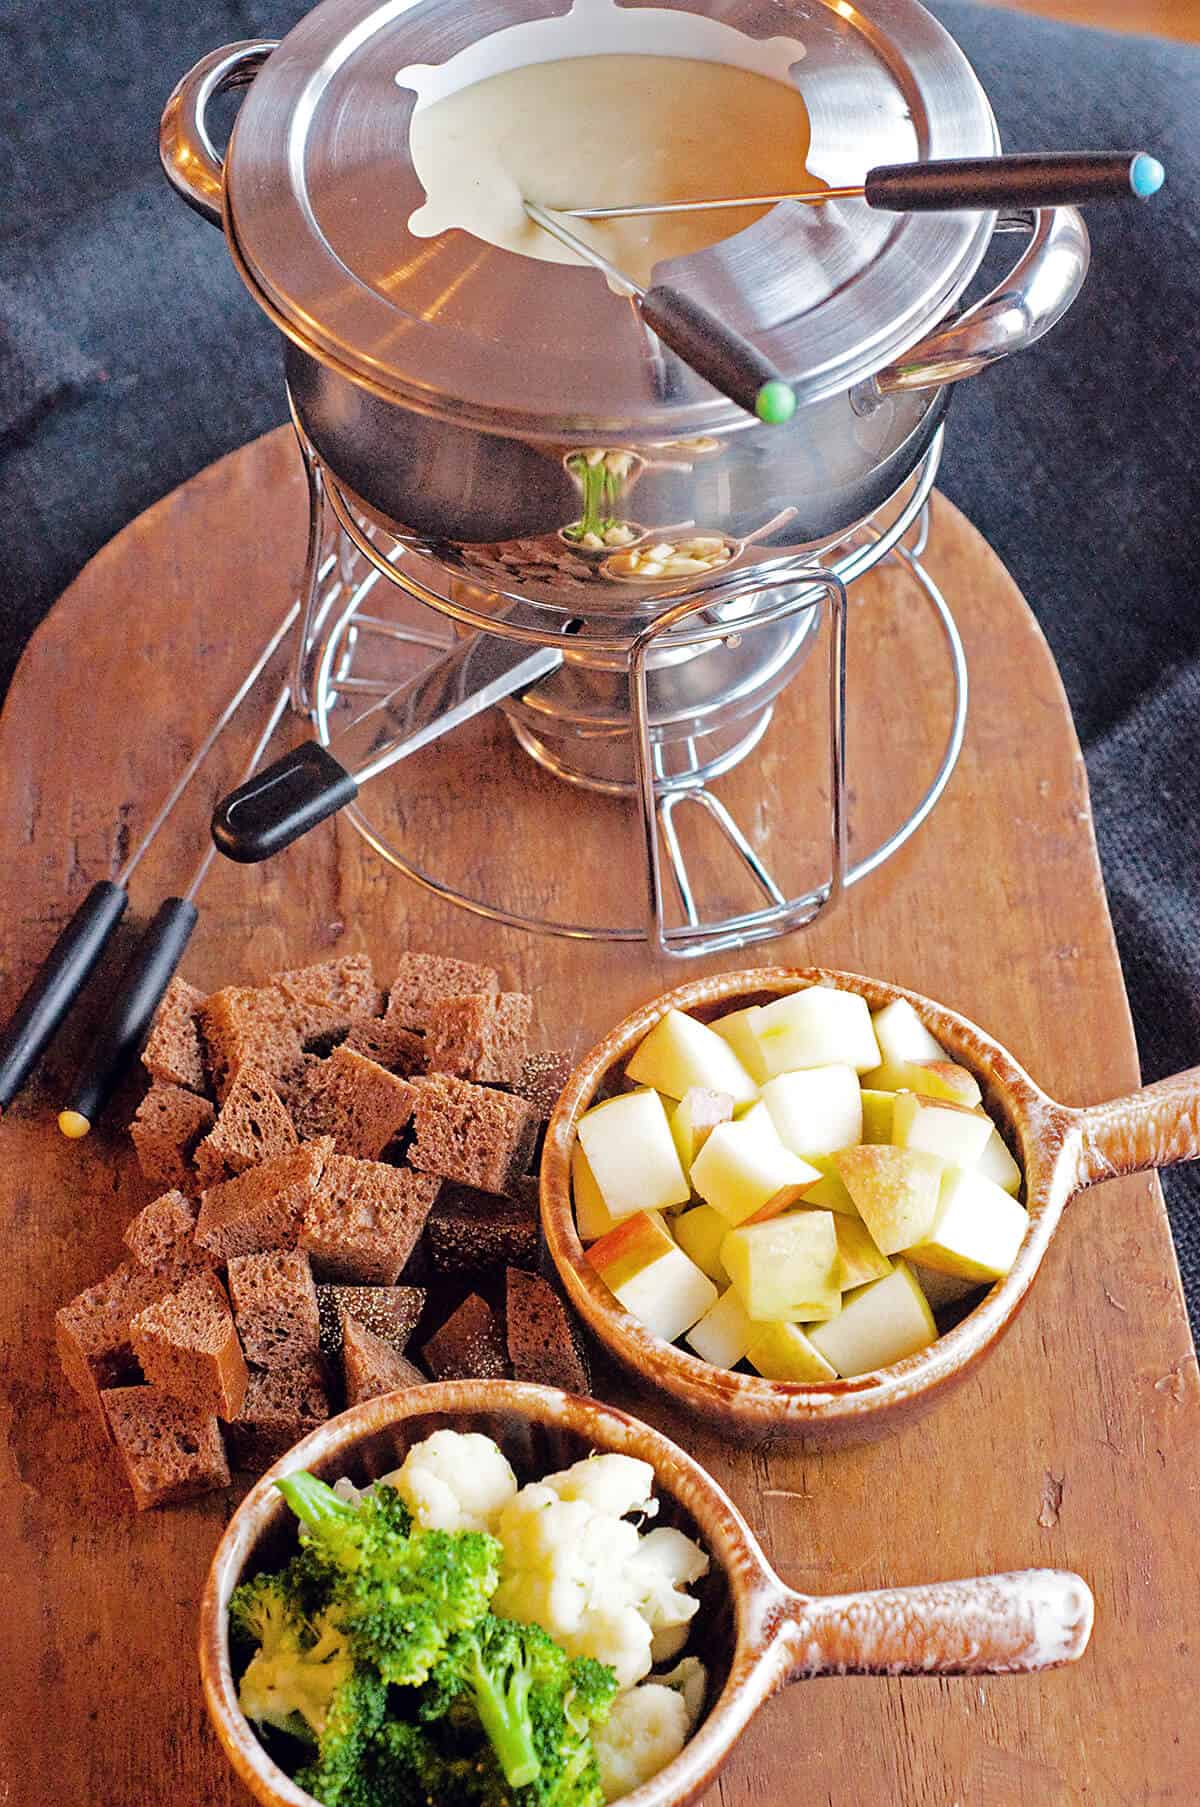 Fondue pot filled with cheese fondue and bread, fruit, and veggie dippers alongside.